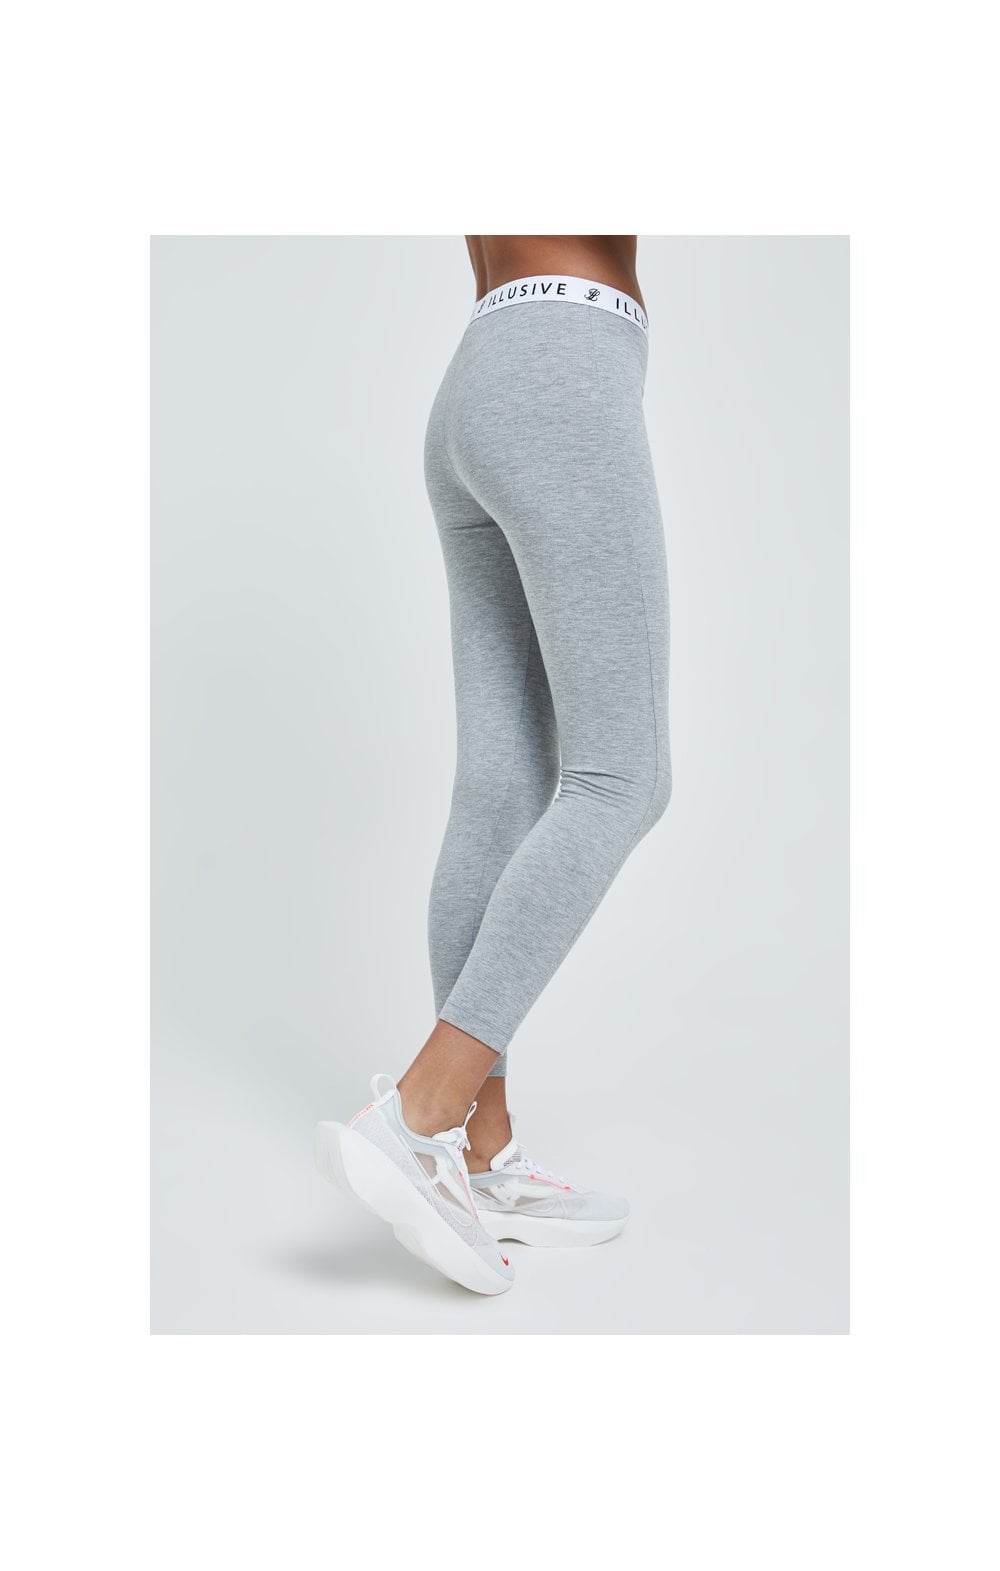 Load image into Gallery viewer, Illusive London Core Leggings - Grey Marl (3)